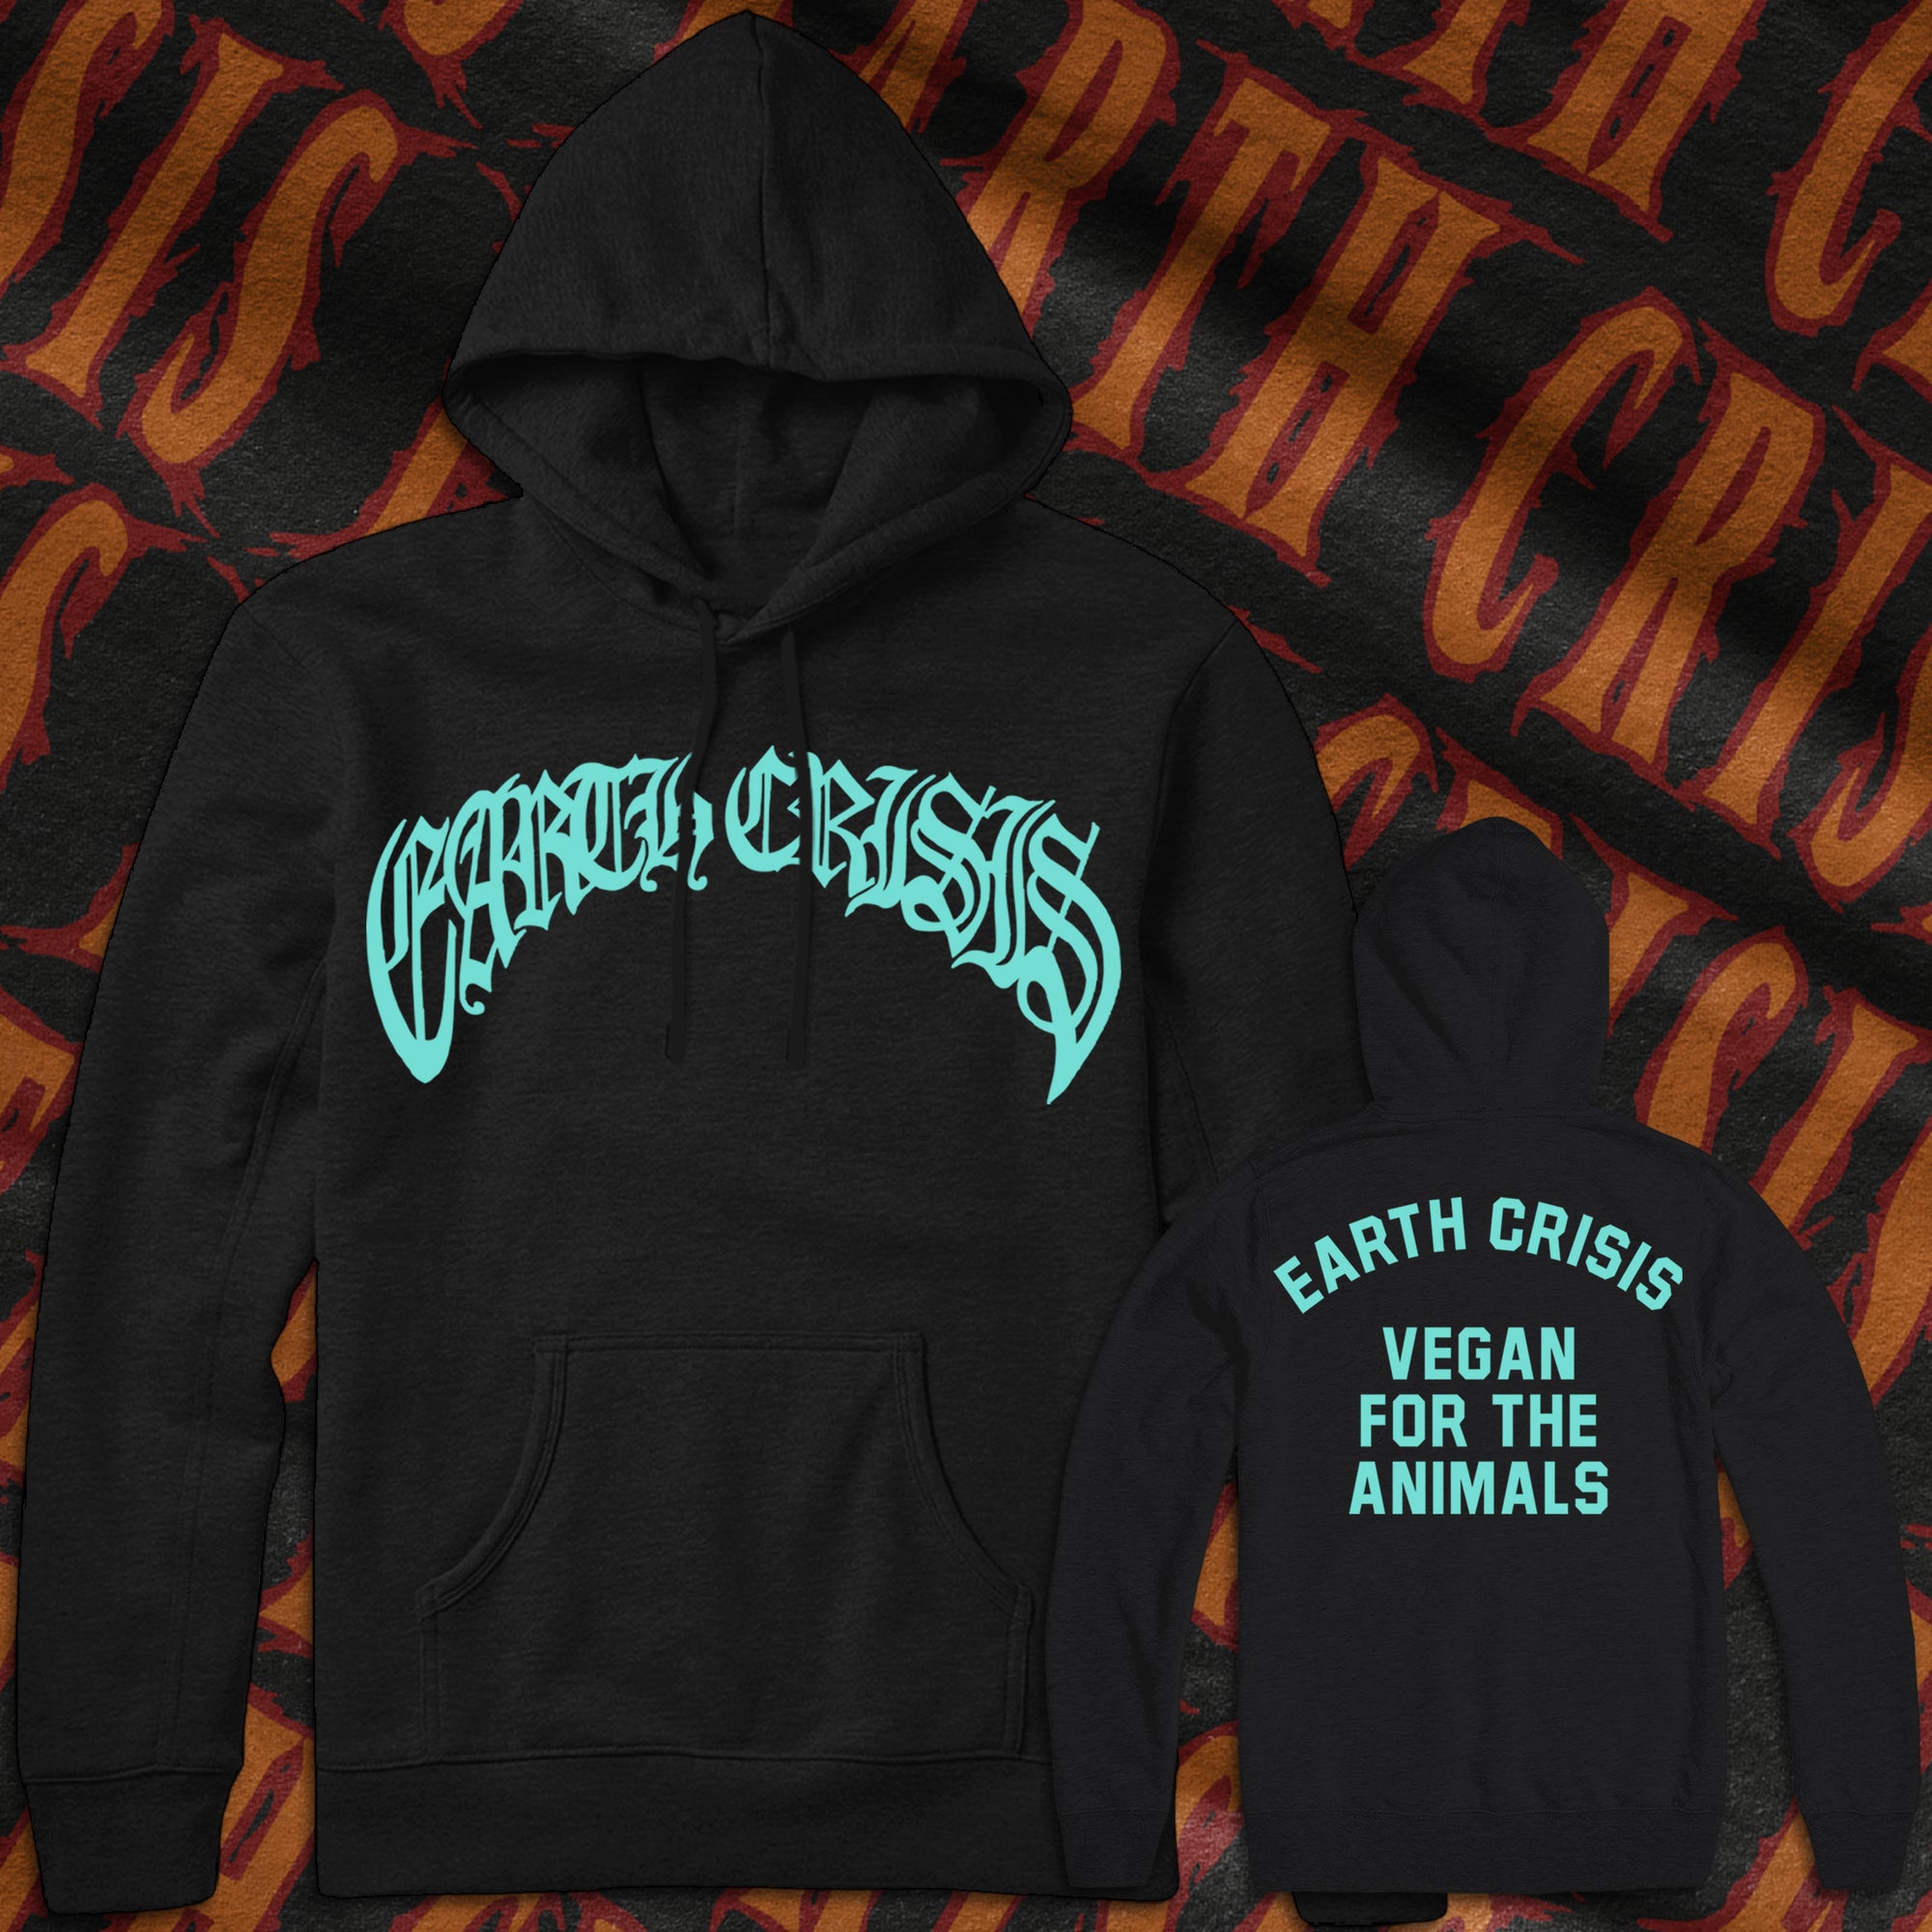 EARTH CRISIS "VEGAN FOR THE ANIMALS" PULLOVER HOOD